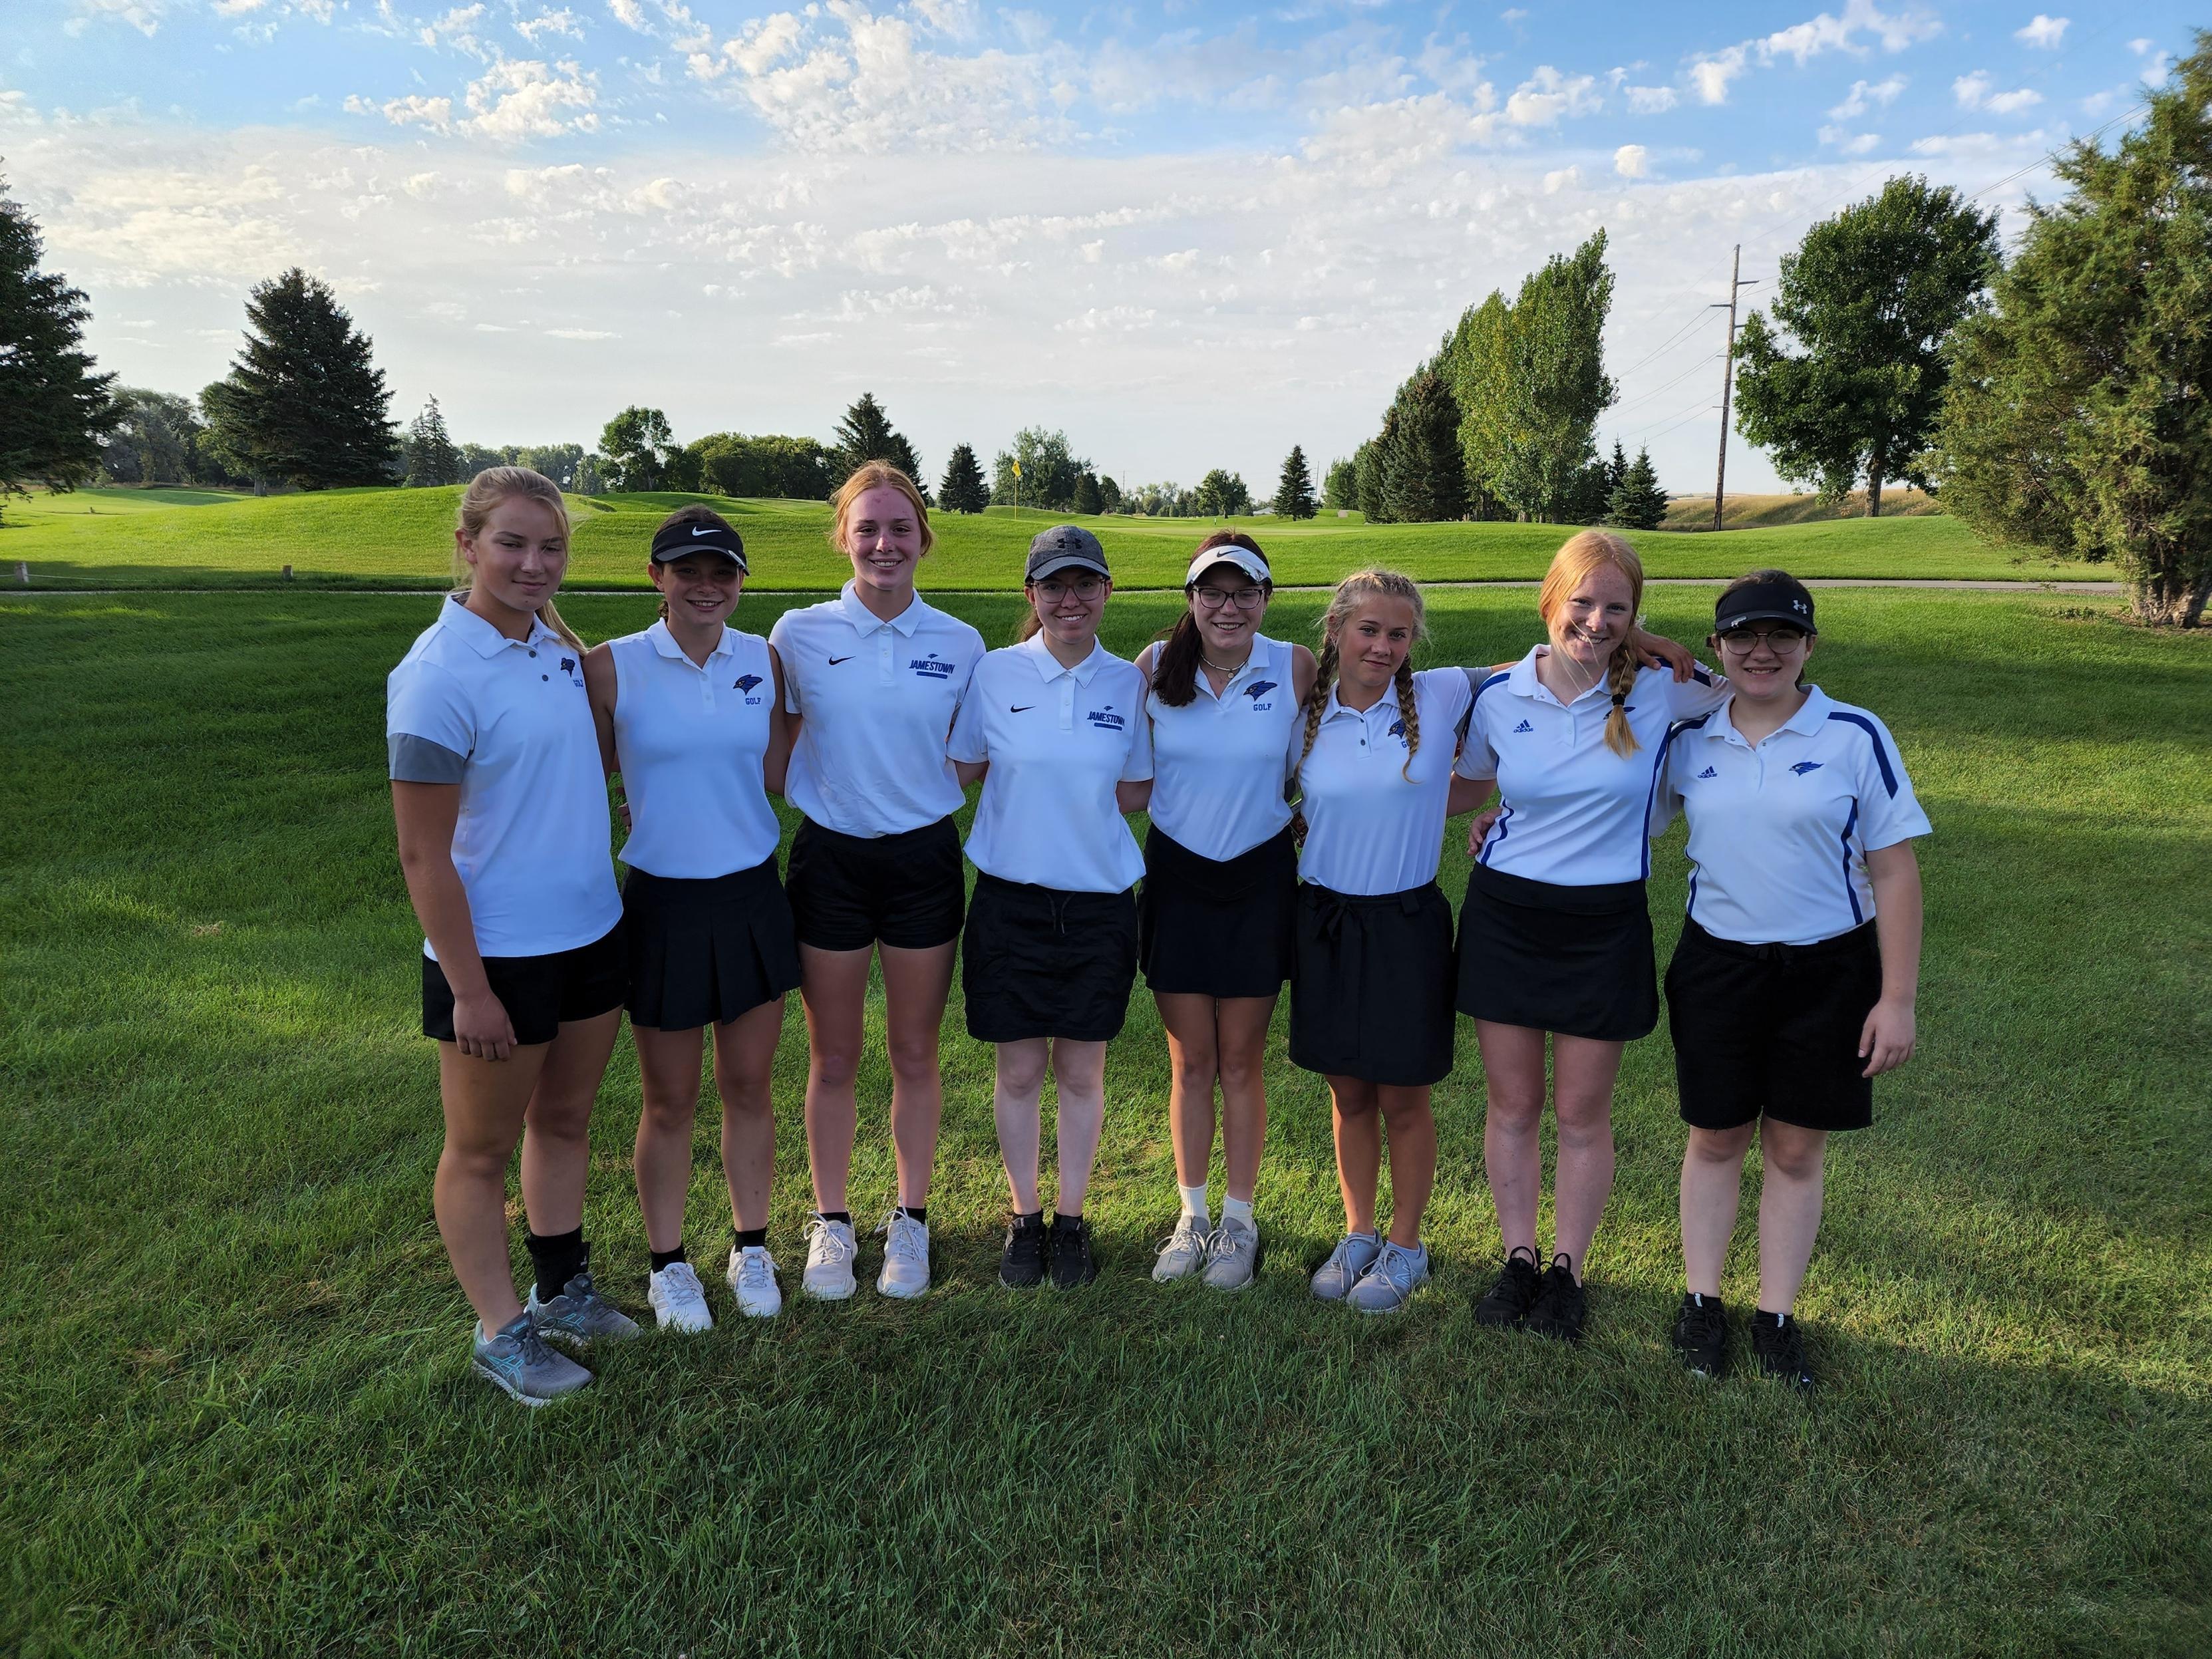 Group photo of the Girls' Golf Team